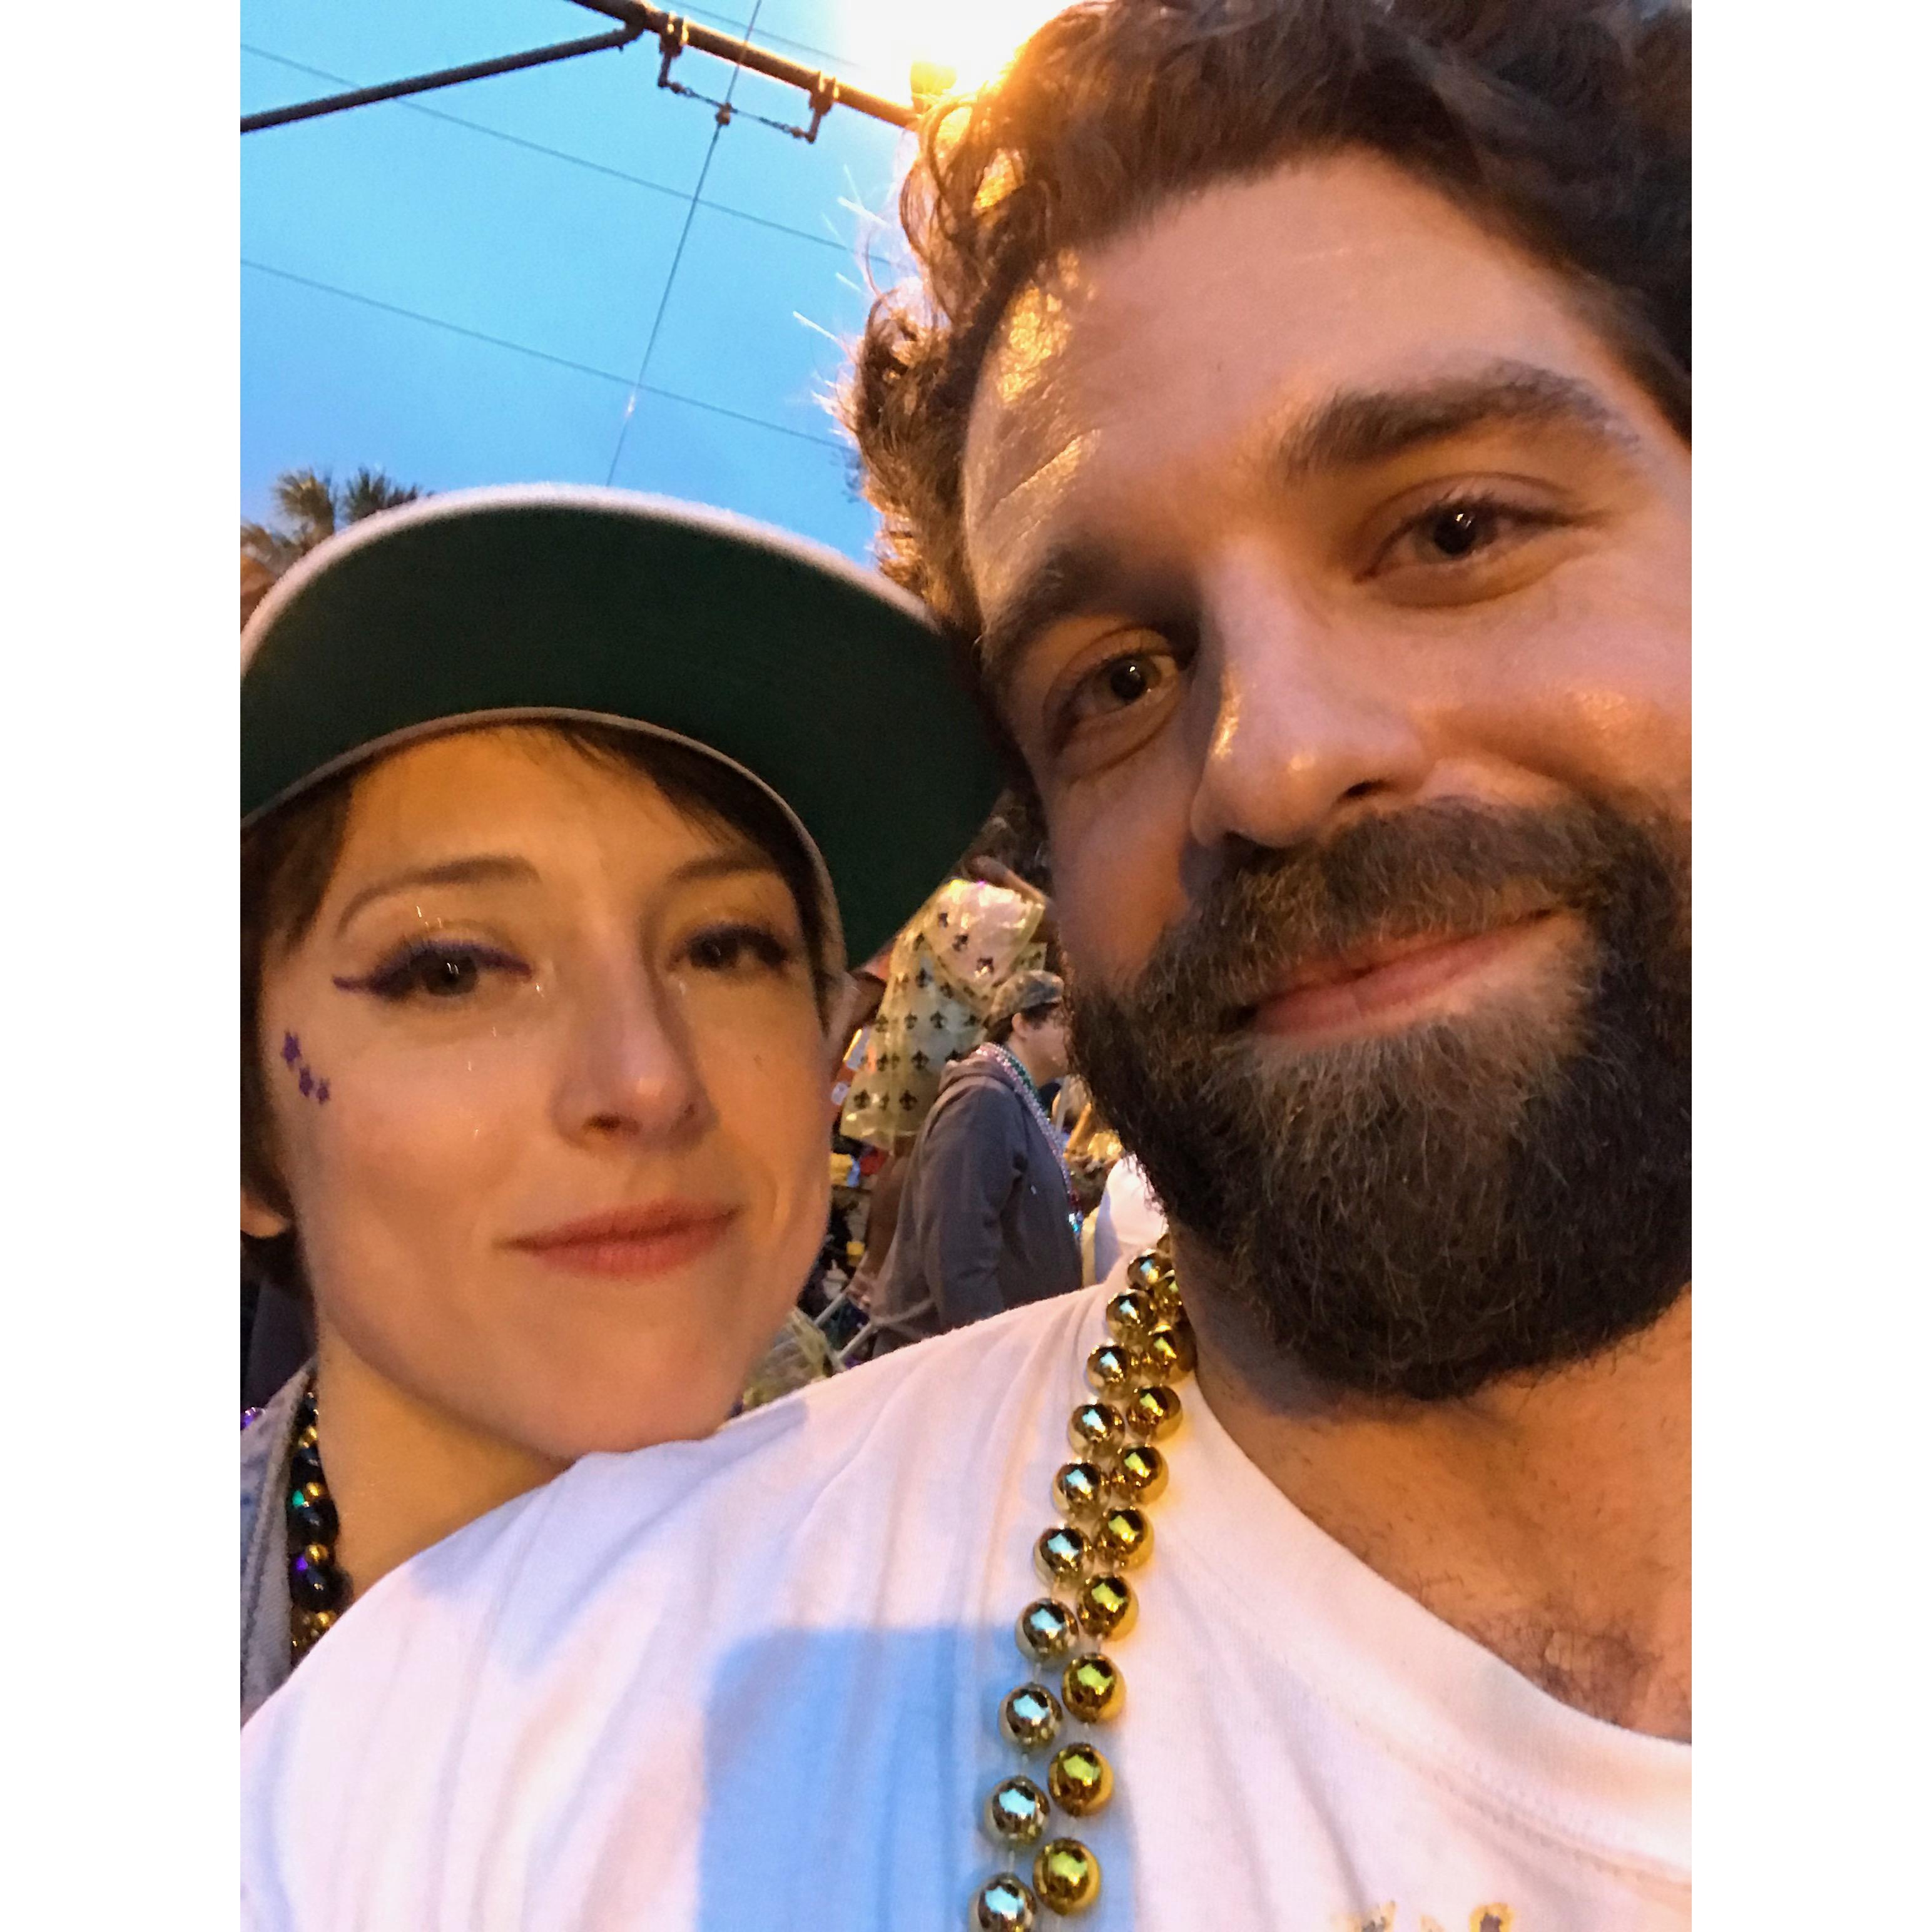 NOLA, Mardi Gras 2018- our first MG as a couple, words can't even explain